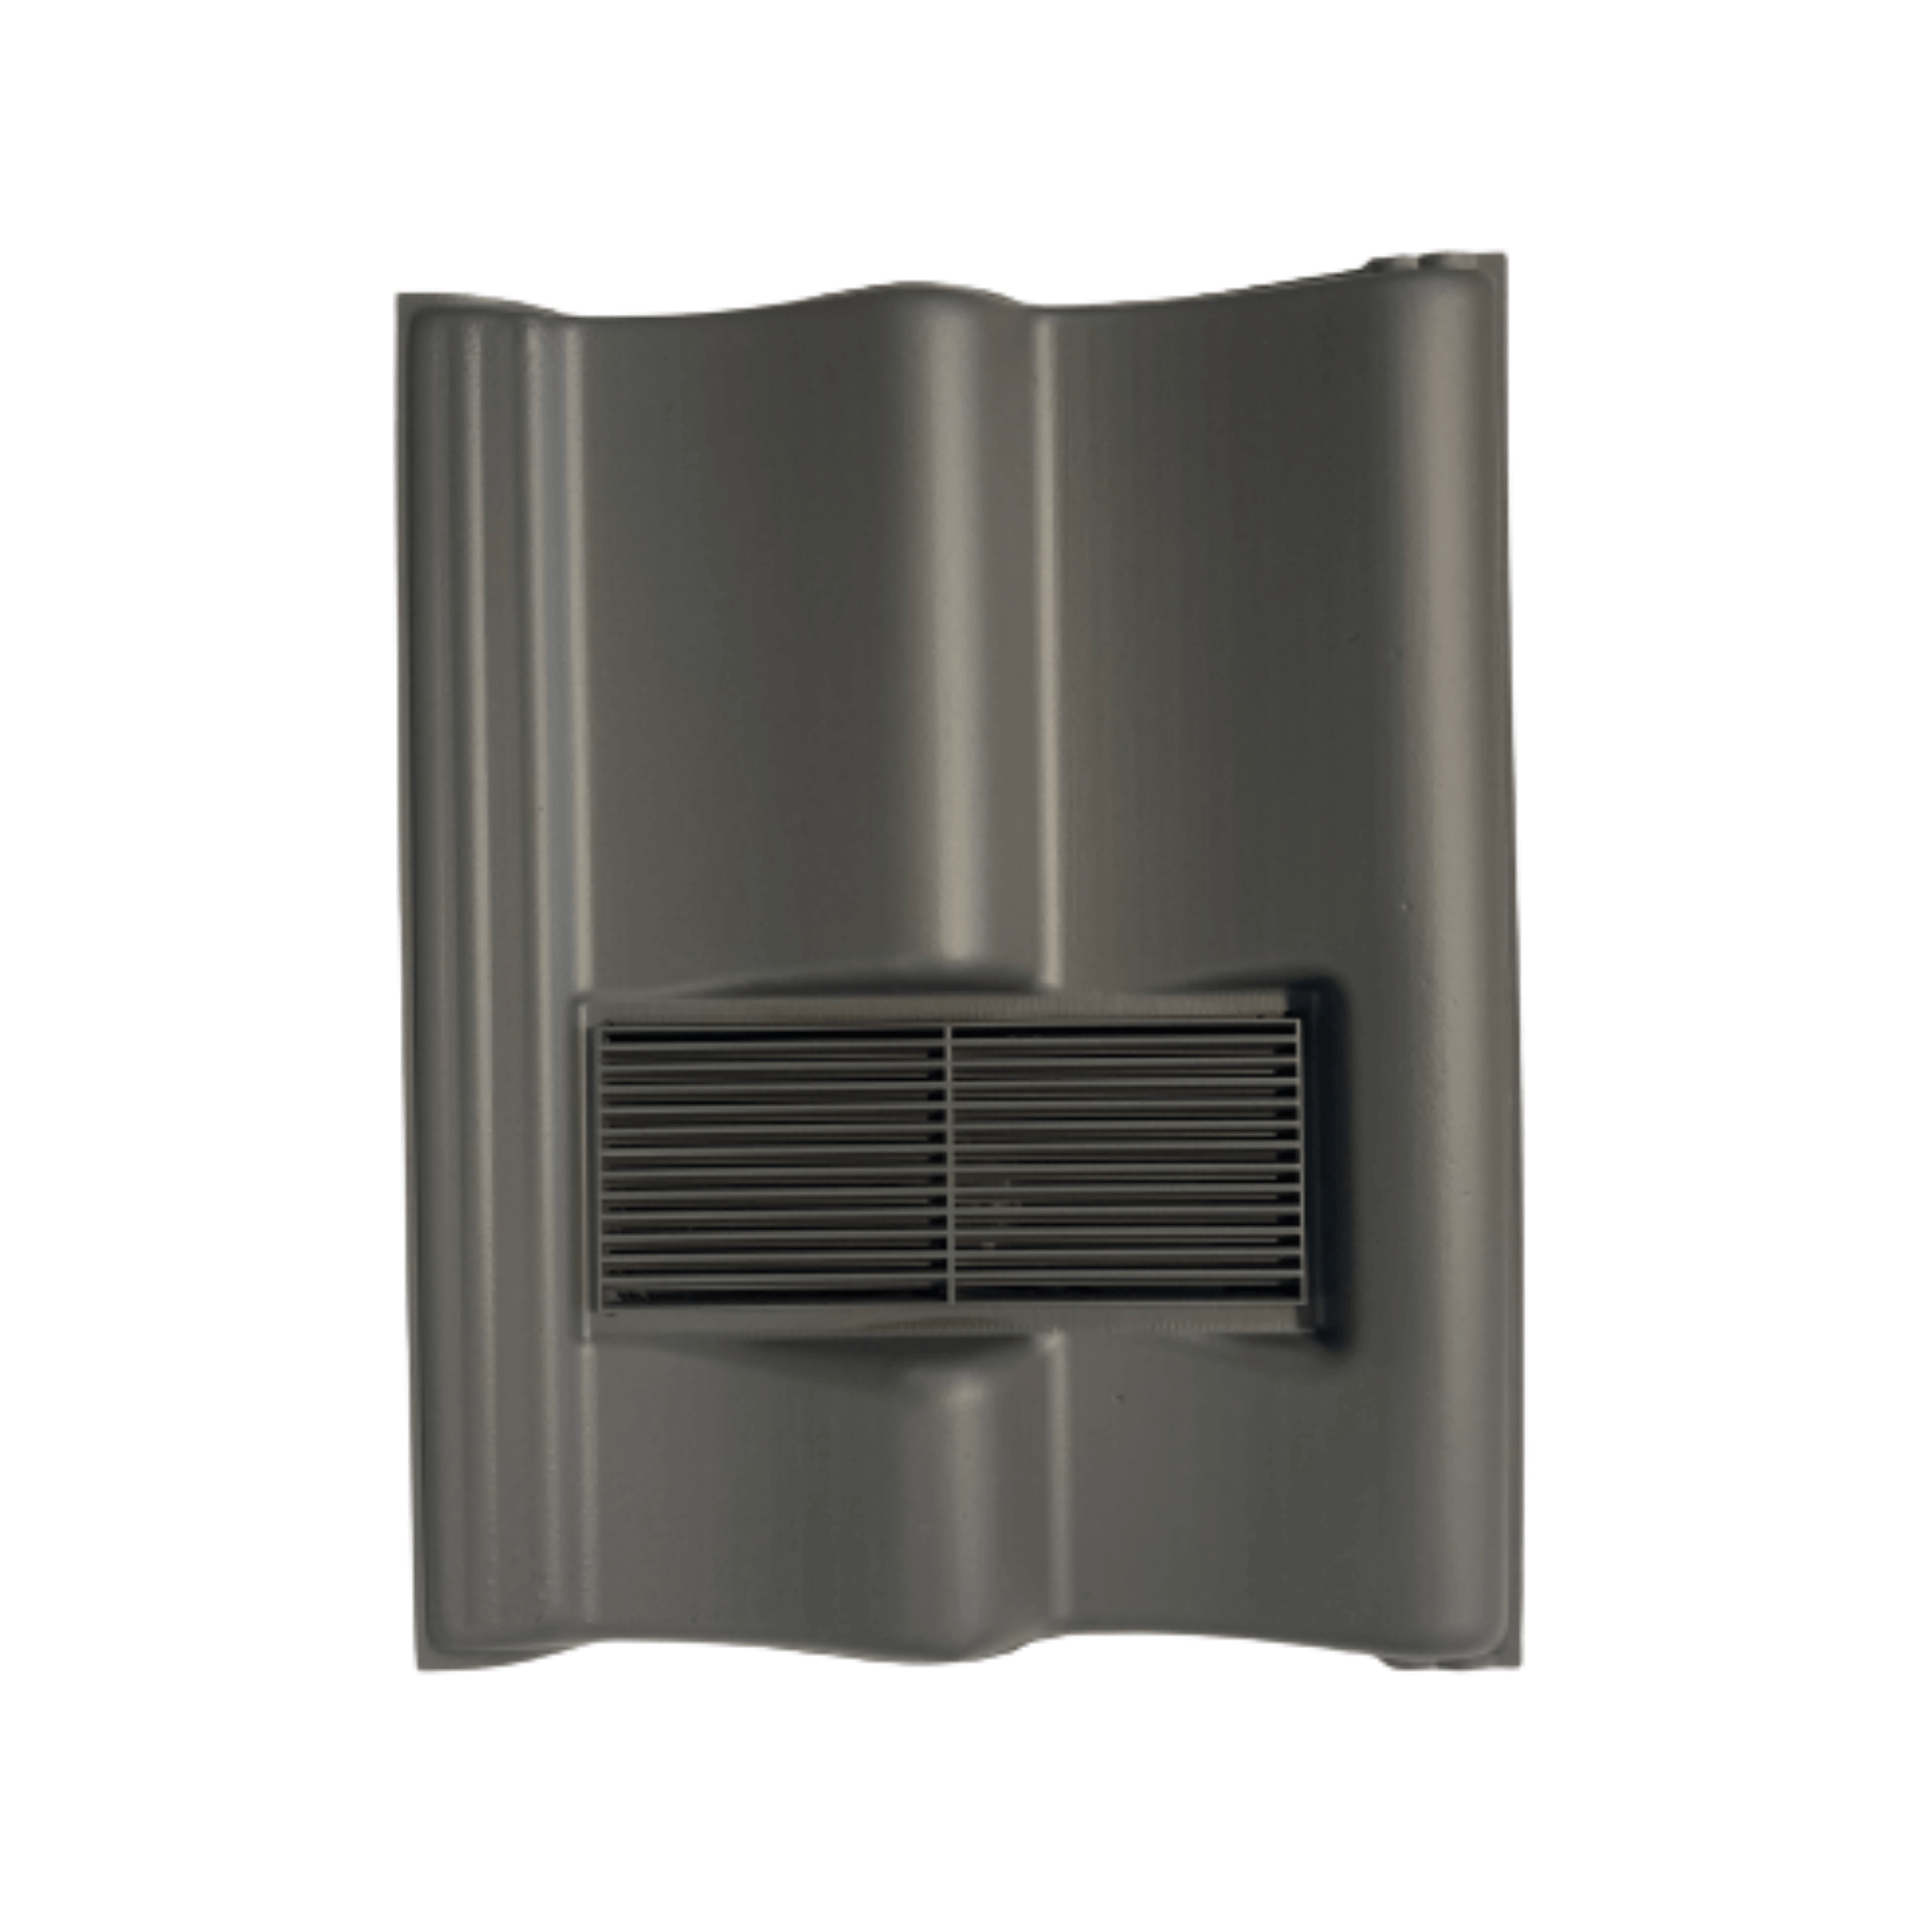 Redland Grovebury Vent Tile Charcoal Grey Smooth - Beddoes Products